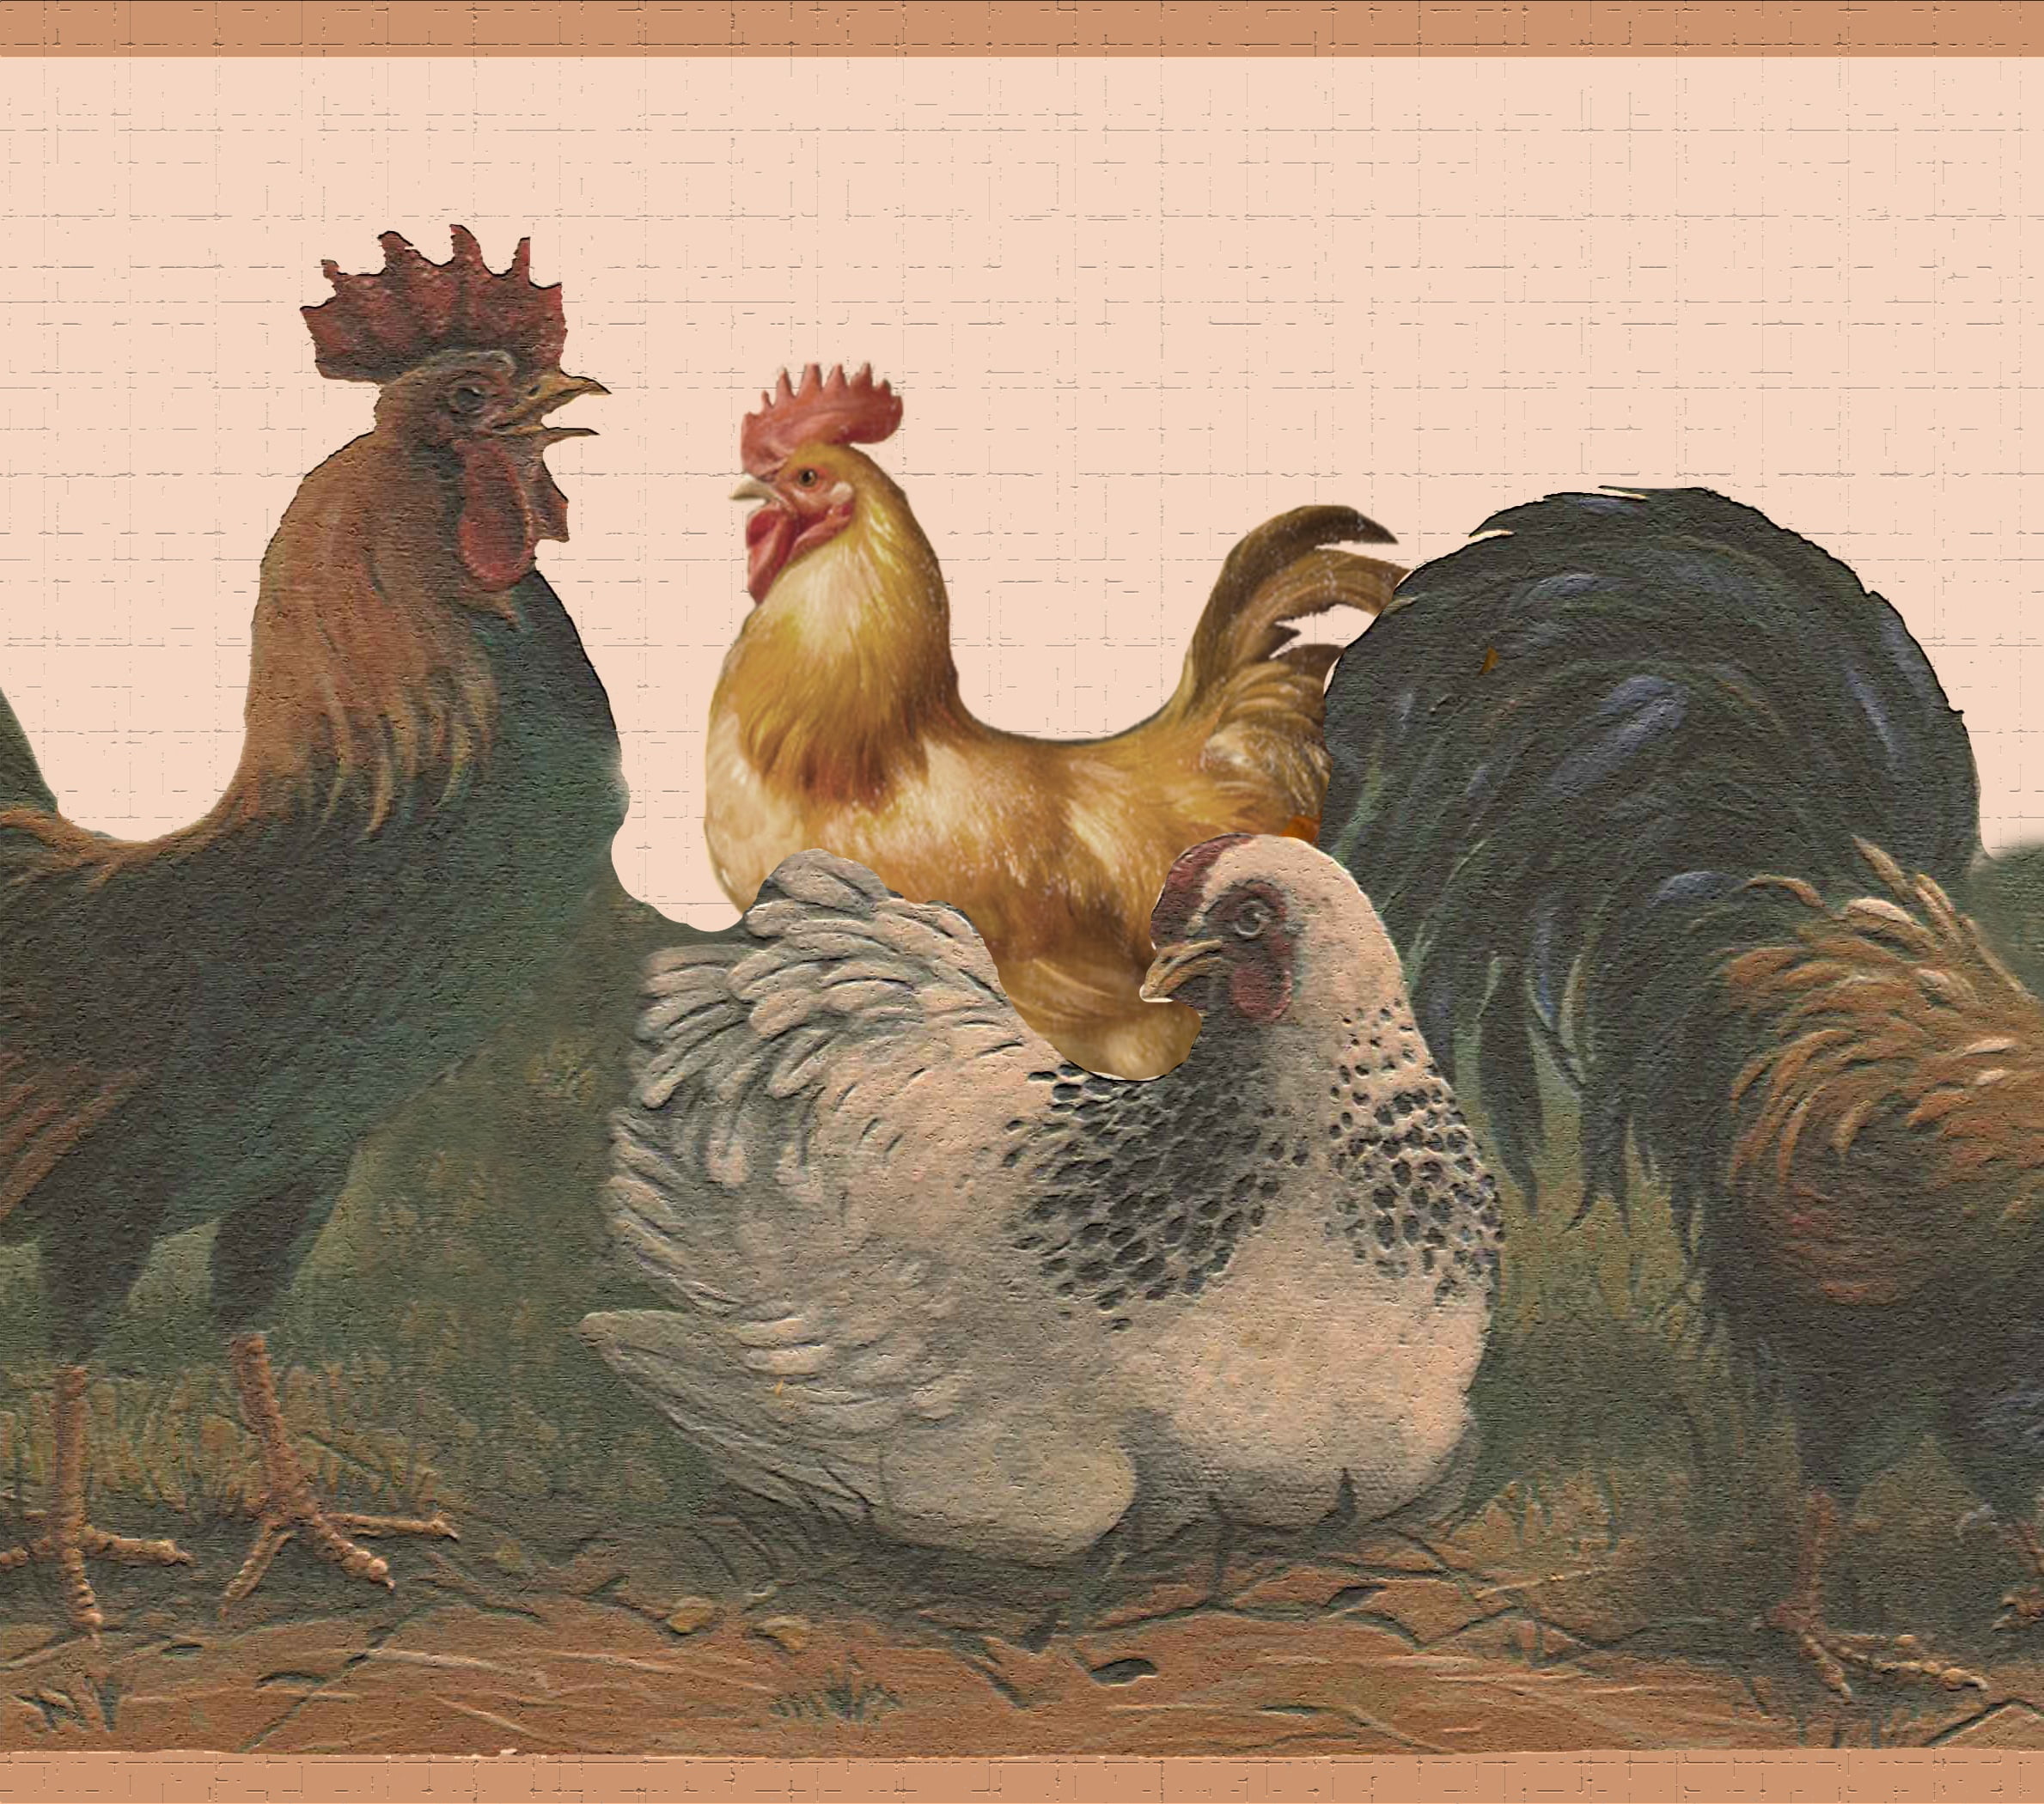 Primitive Country Chicken & Rooster on Wood Brown Wallpaper Border Wall Decor 